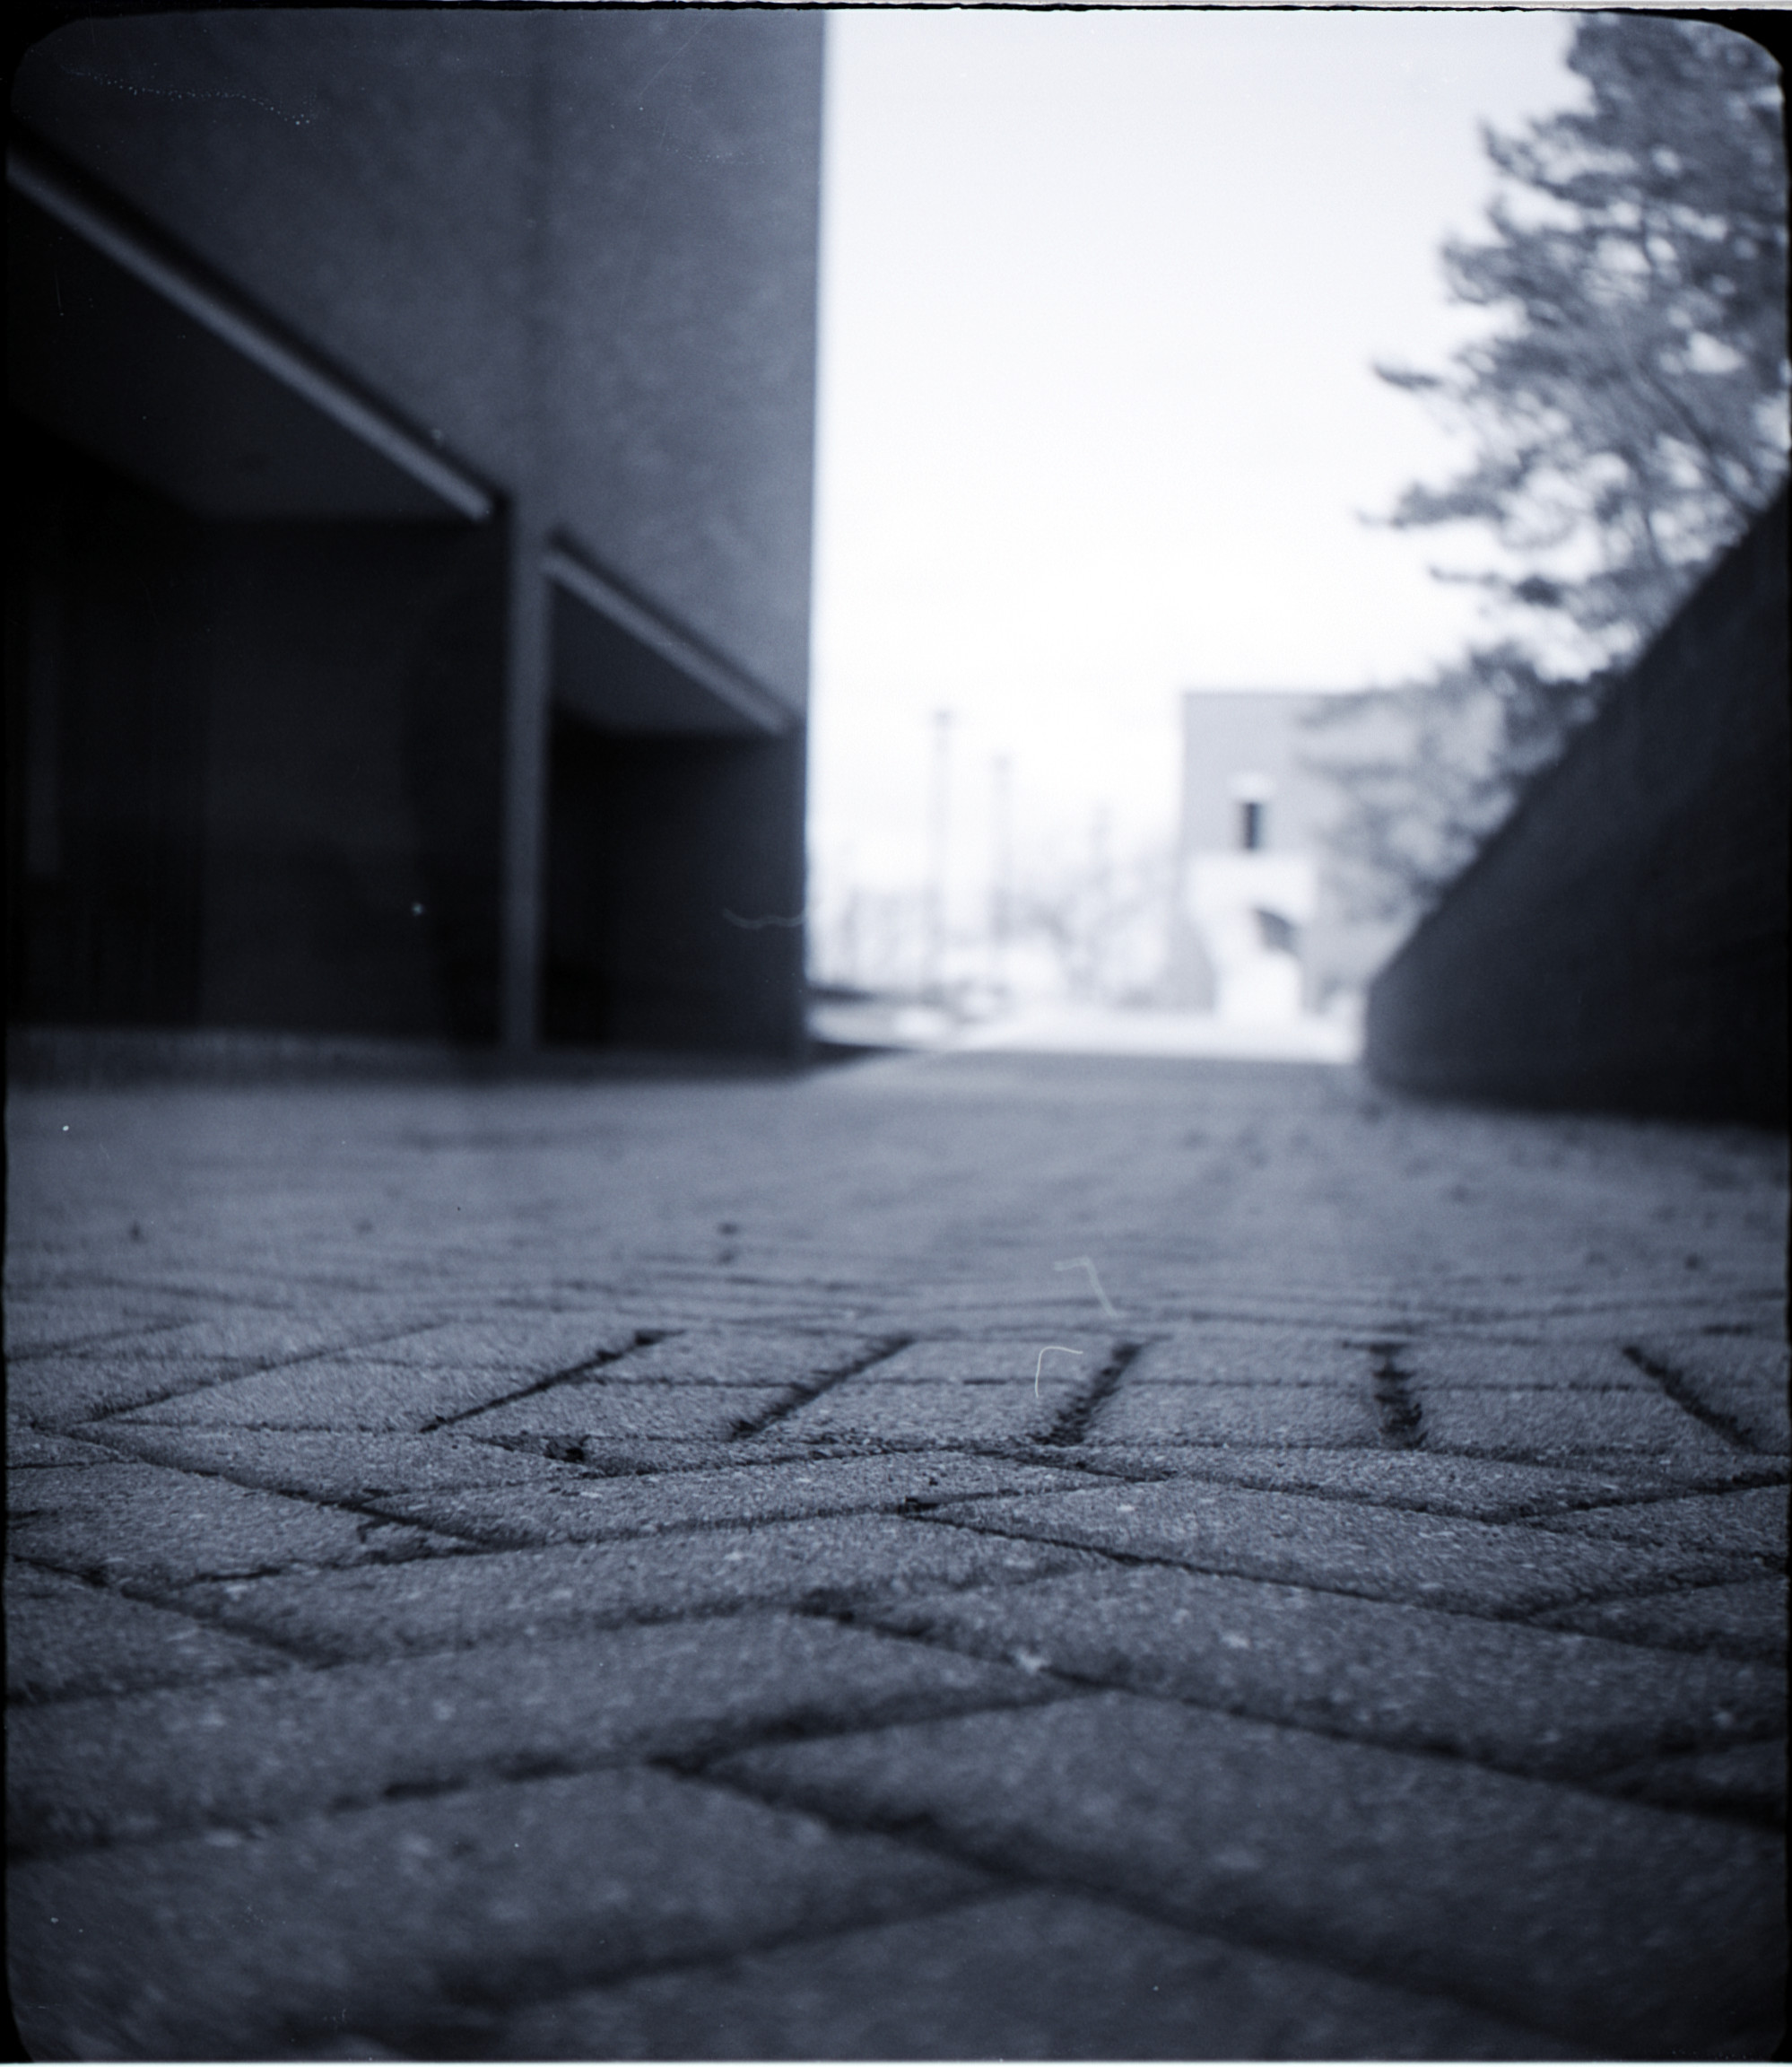 a black and white photo of a brick sidewalk with some brick buildings out of focus in the background